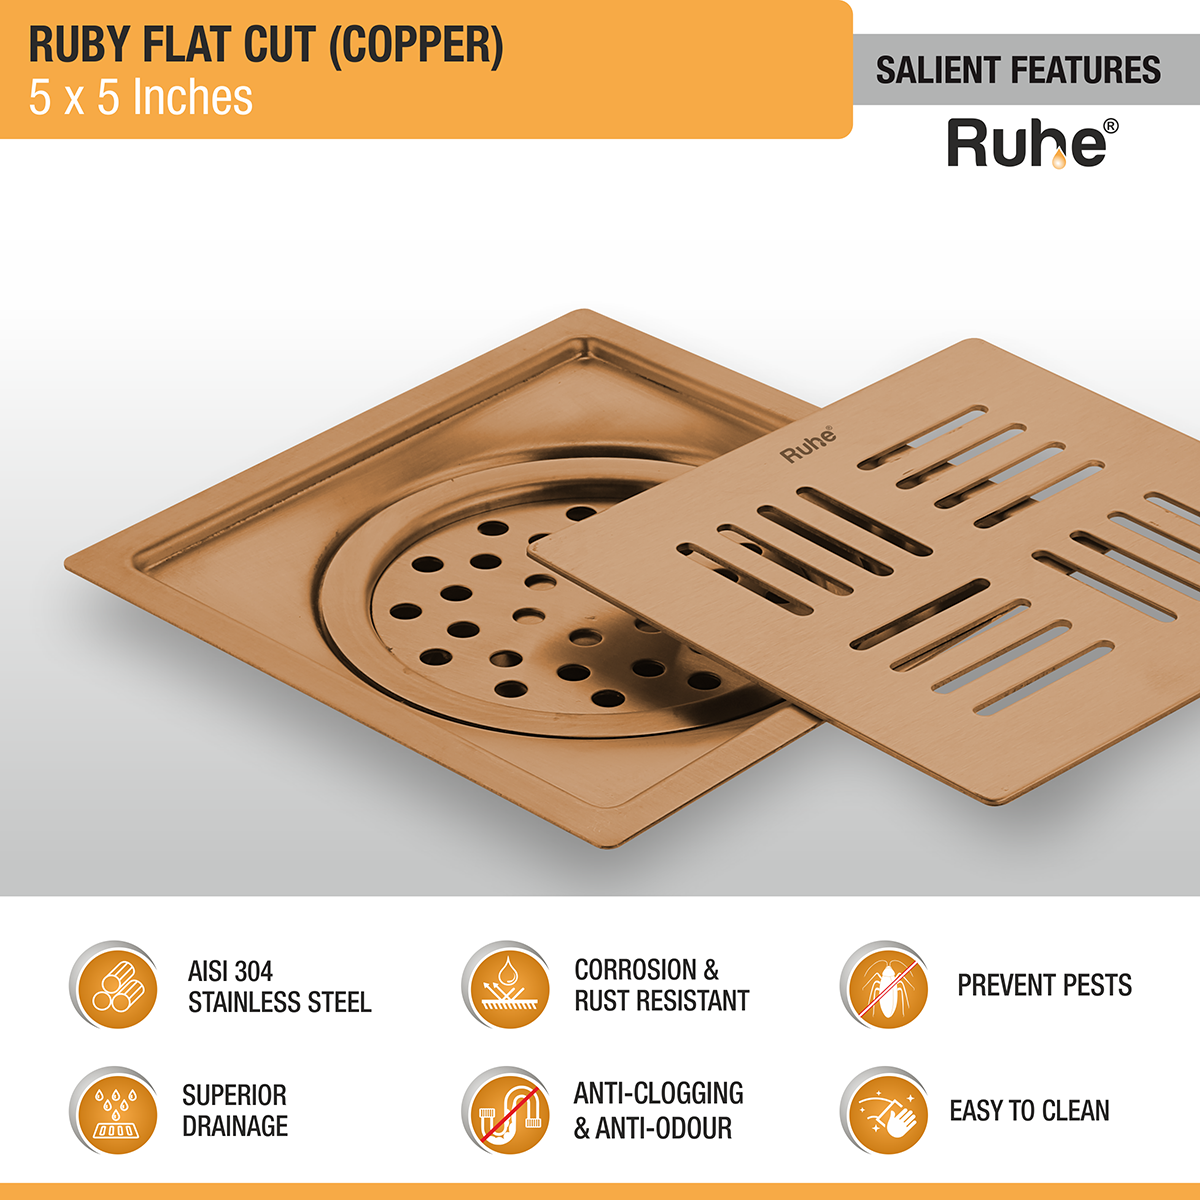 Ruby Square Flat Cut Floor Drain in Antique Copper PVD Coating (5 x 5 Inches) features